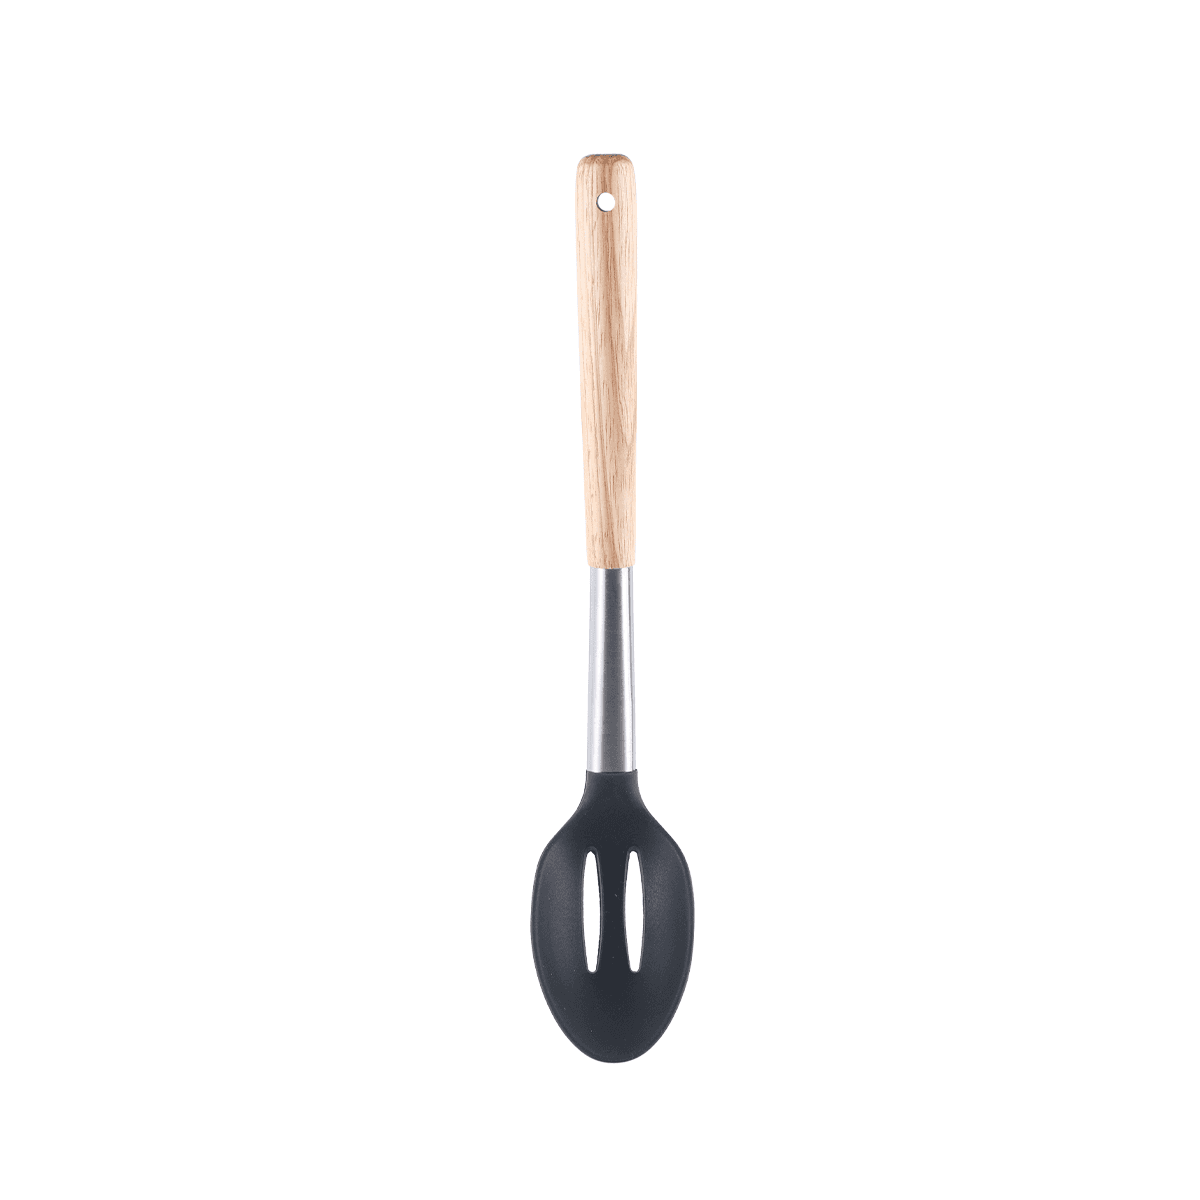 Vague Silicone Grey Silicone Slotted Spoon with Oak Wood Handle Grey